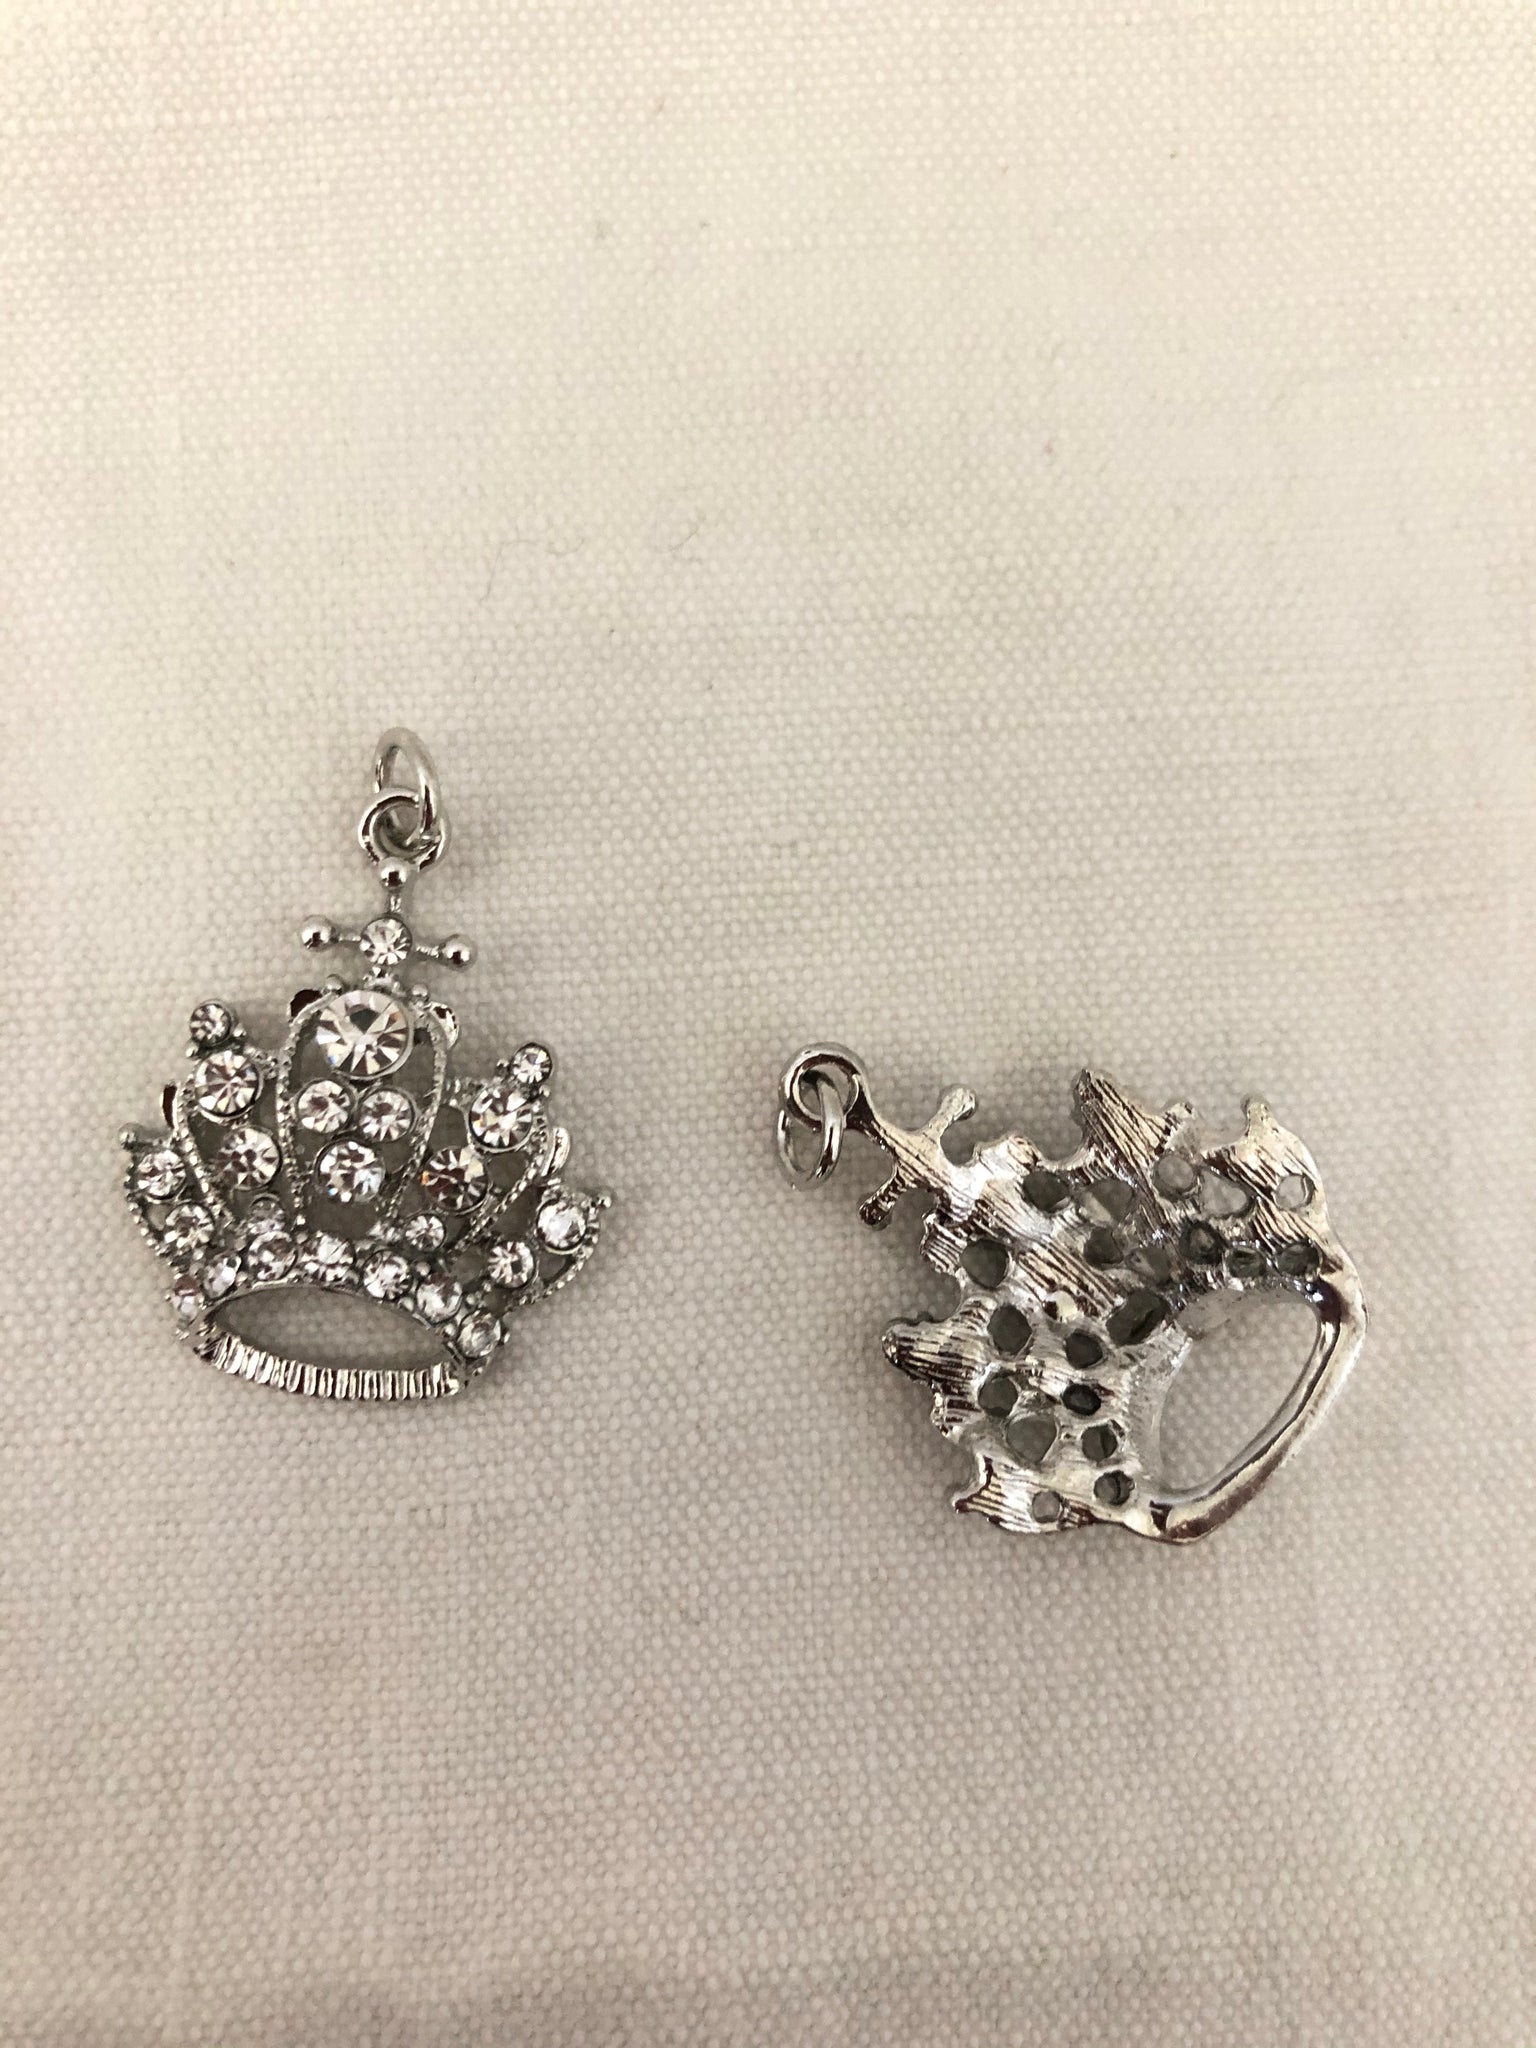 Rhinestone crowns with jump ring on top,2 pieces – Faded Fragments